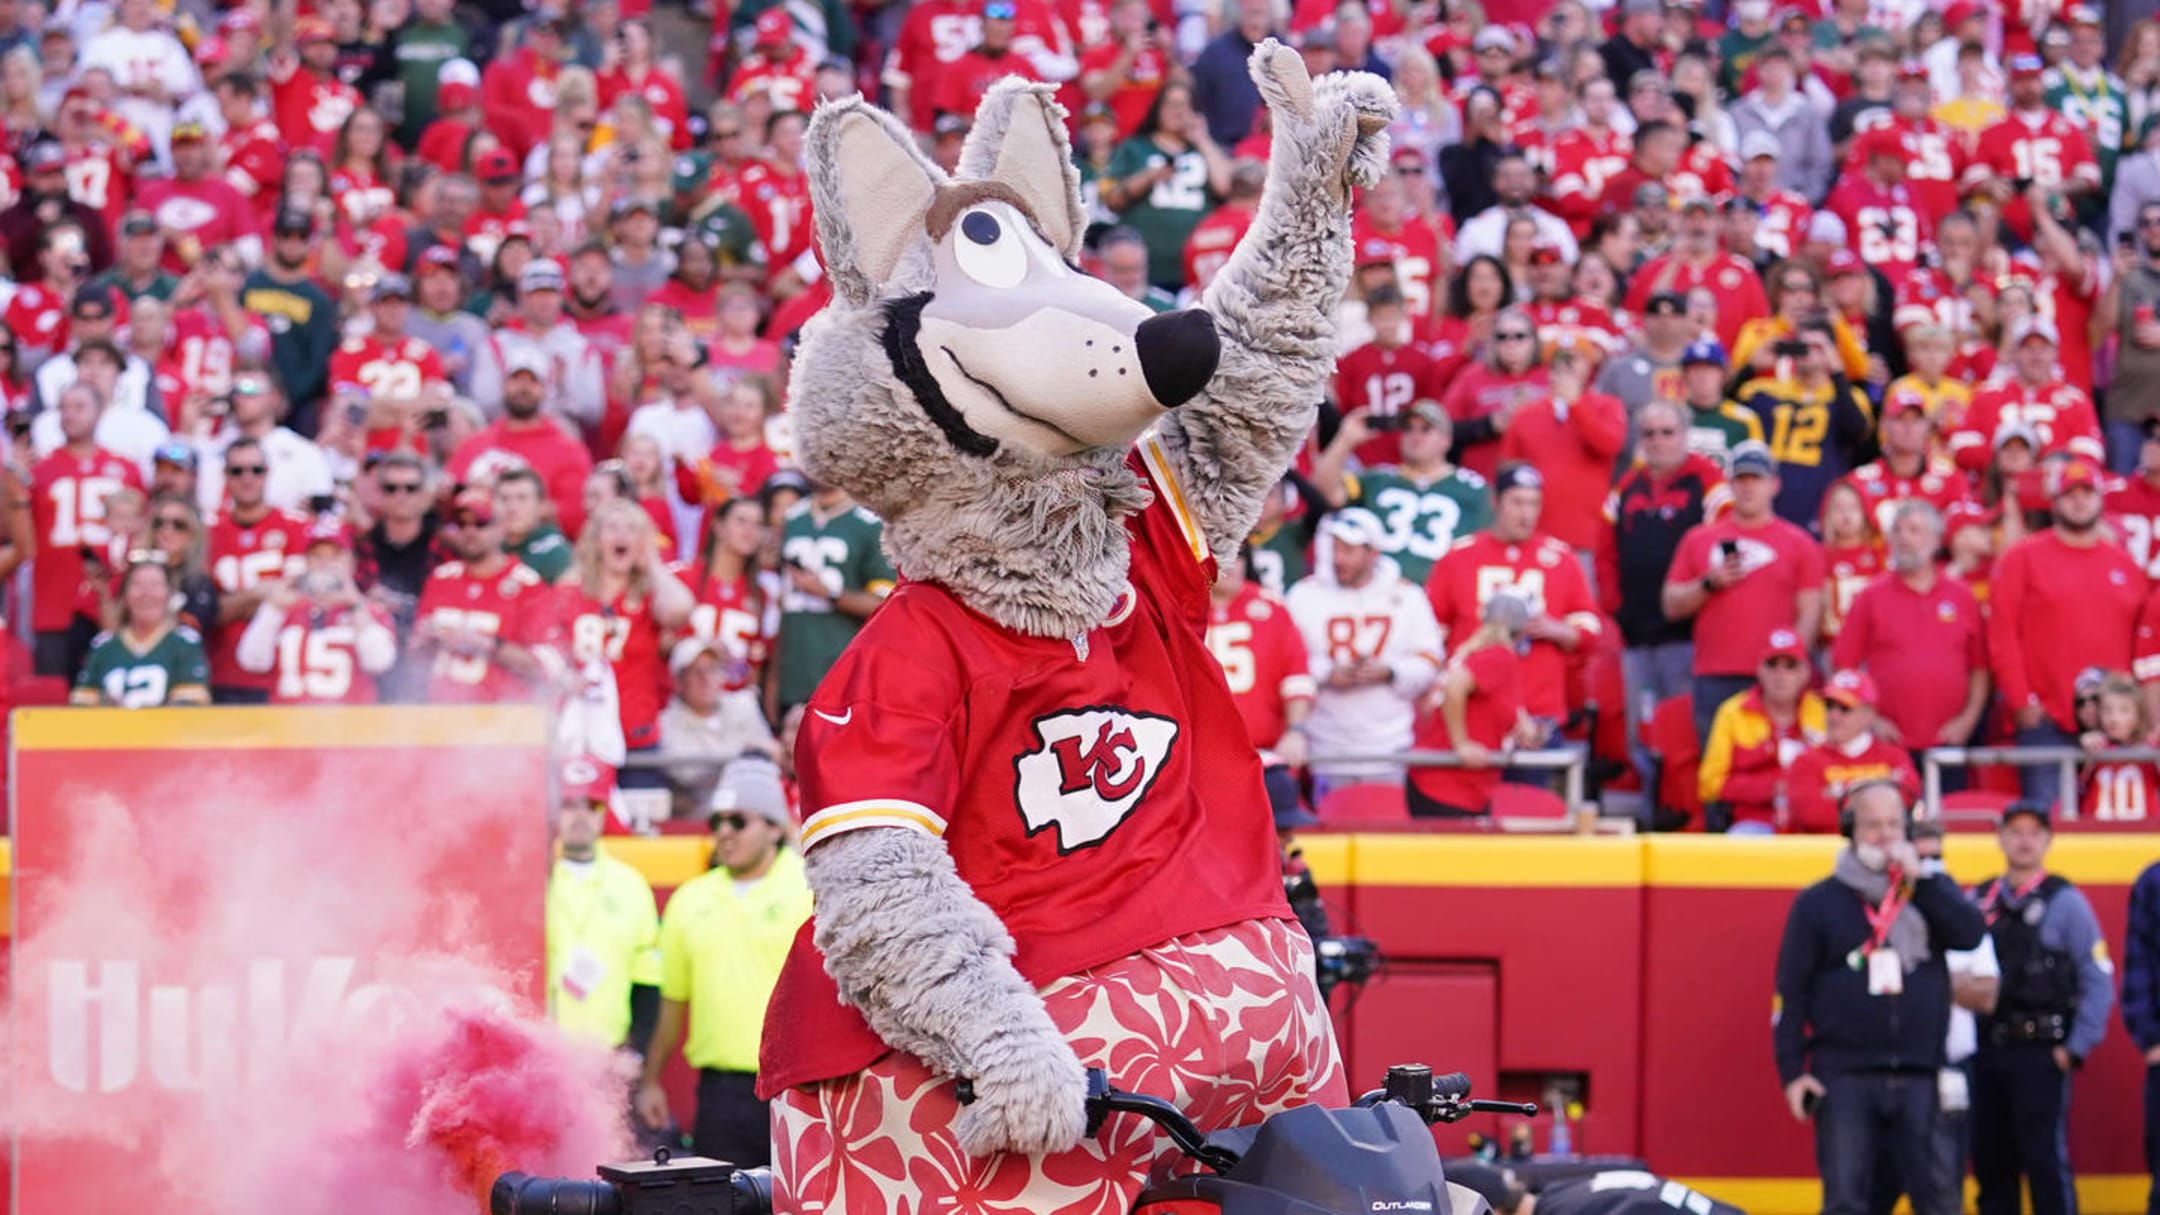 Chiefs' mascot has must-see reaction to Bengals' game-winner